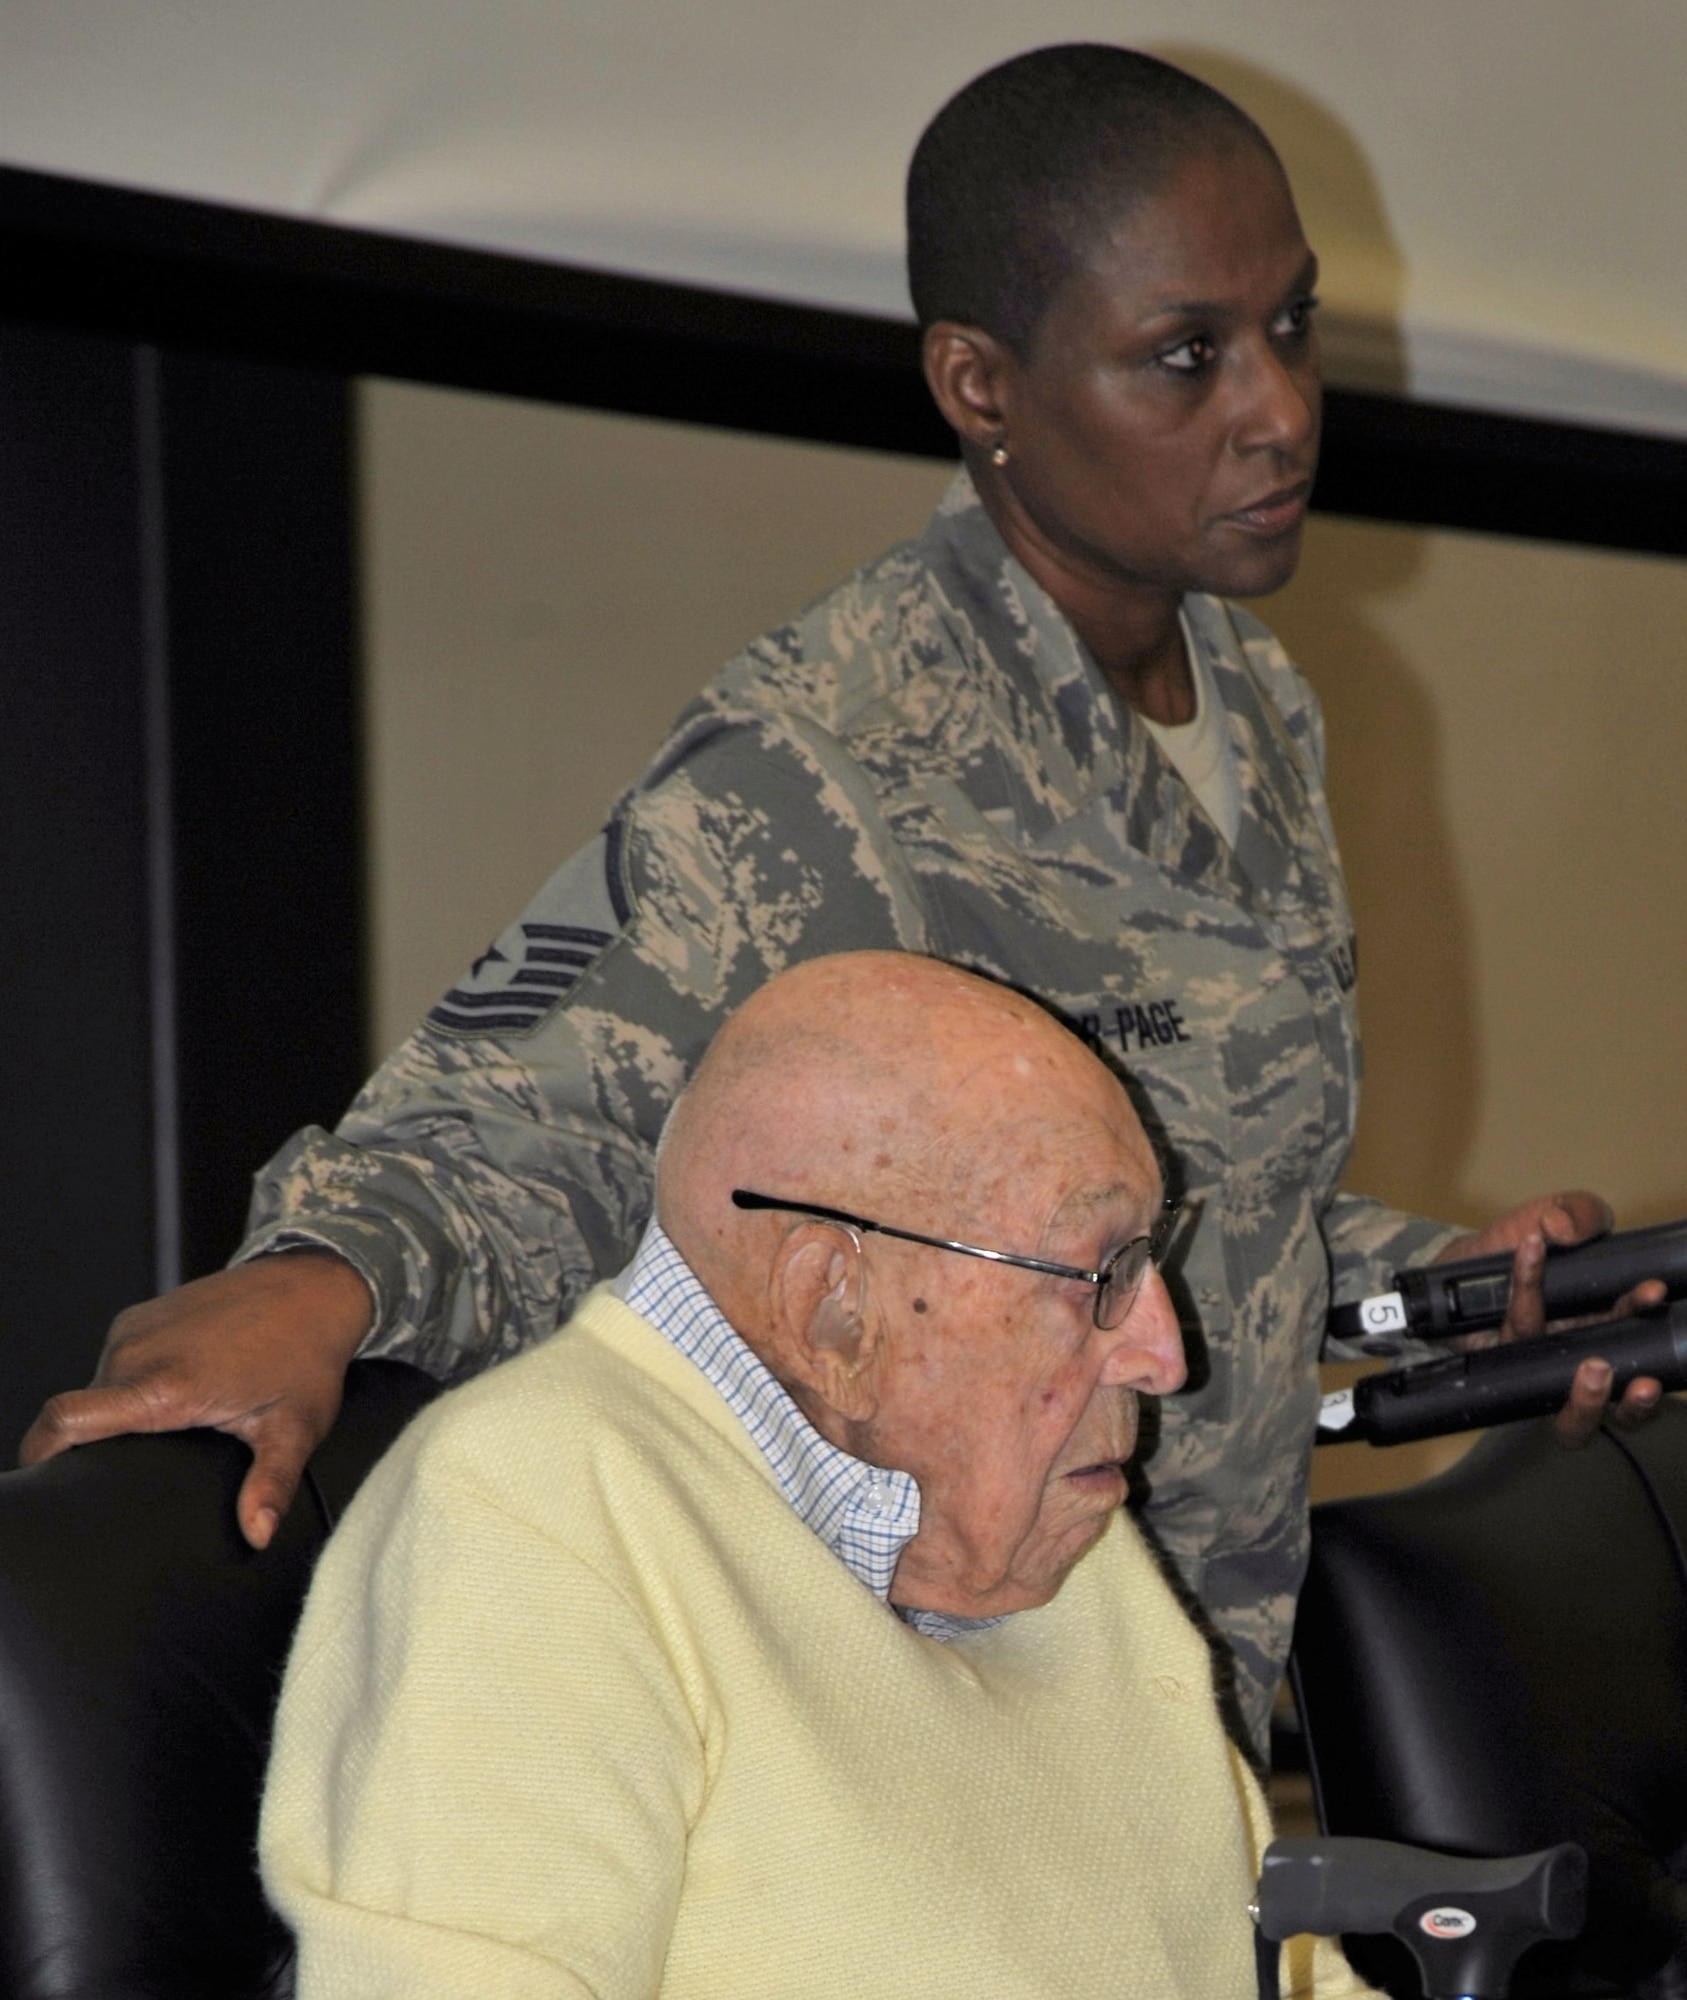 Master Sgt. Rosalind Rider-Page, 433rd Training Squadron, prepares to assist Retired Lt. Col. Dick Cole from the stage following his question-and-answer session at Joint Base San Antonio-Lackland on Dec. 13. Colonel Cole is the last living member of the World War II Doolittle Raiders. He and his daughter were special guests of the 433rd Training Squadron during basic military training graduation week activities. (U.S. Air Force photo by Debbie Gildea)